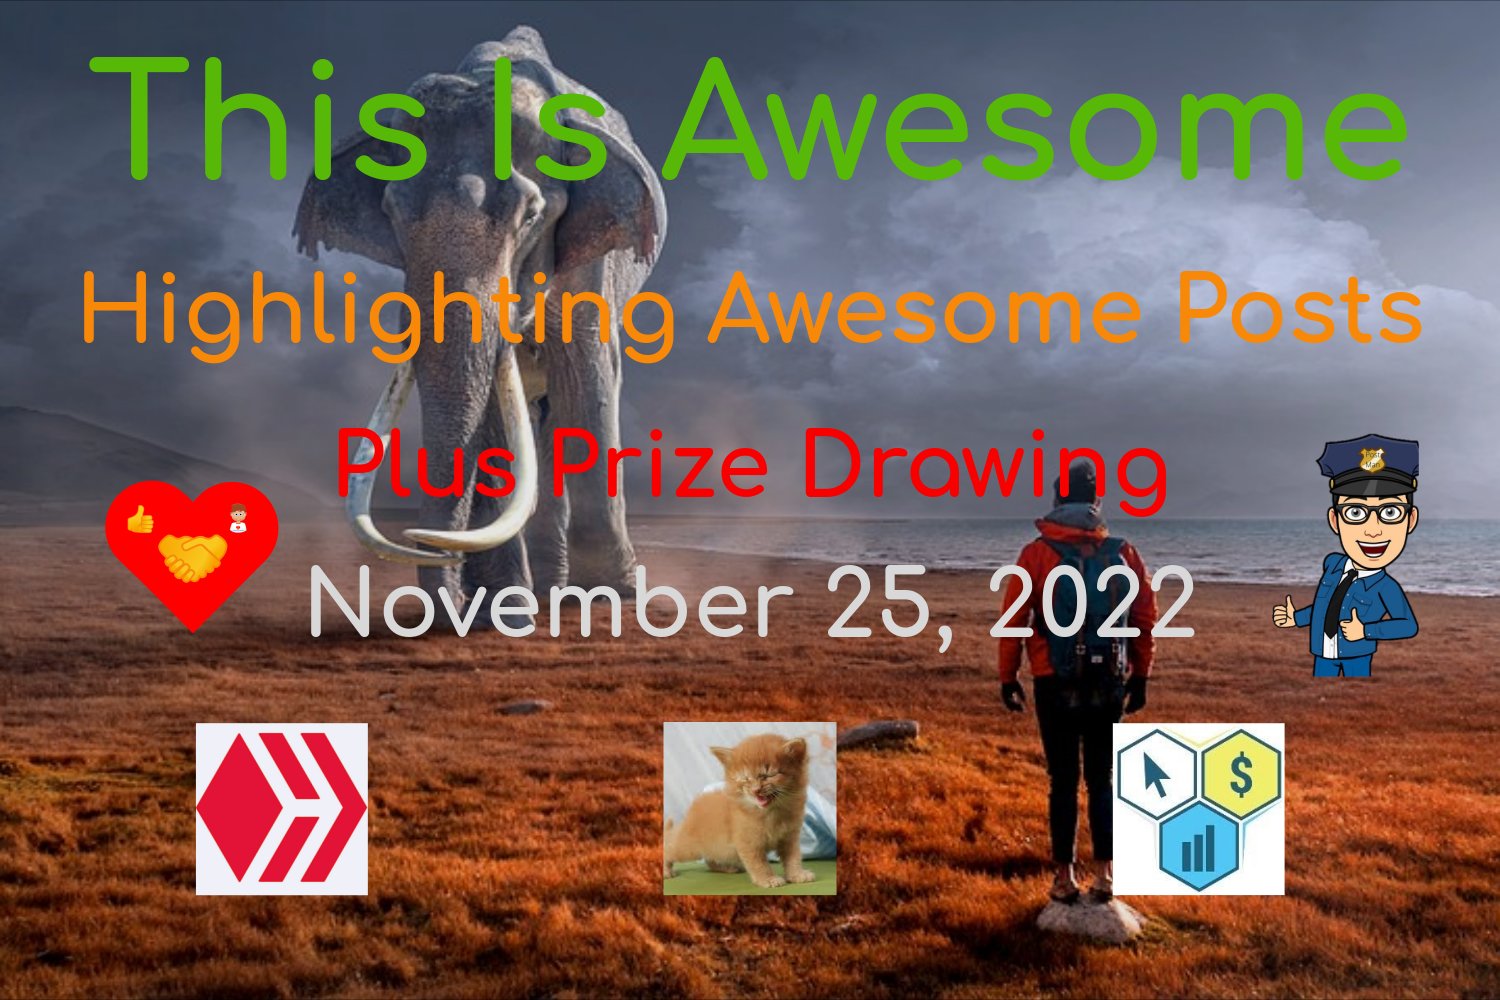 @thisisawesome/this-is-awesome-highlighting-awesome-posts-plus-prize-drawing-november-25-2022